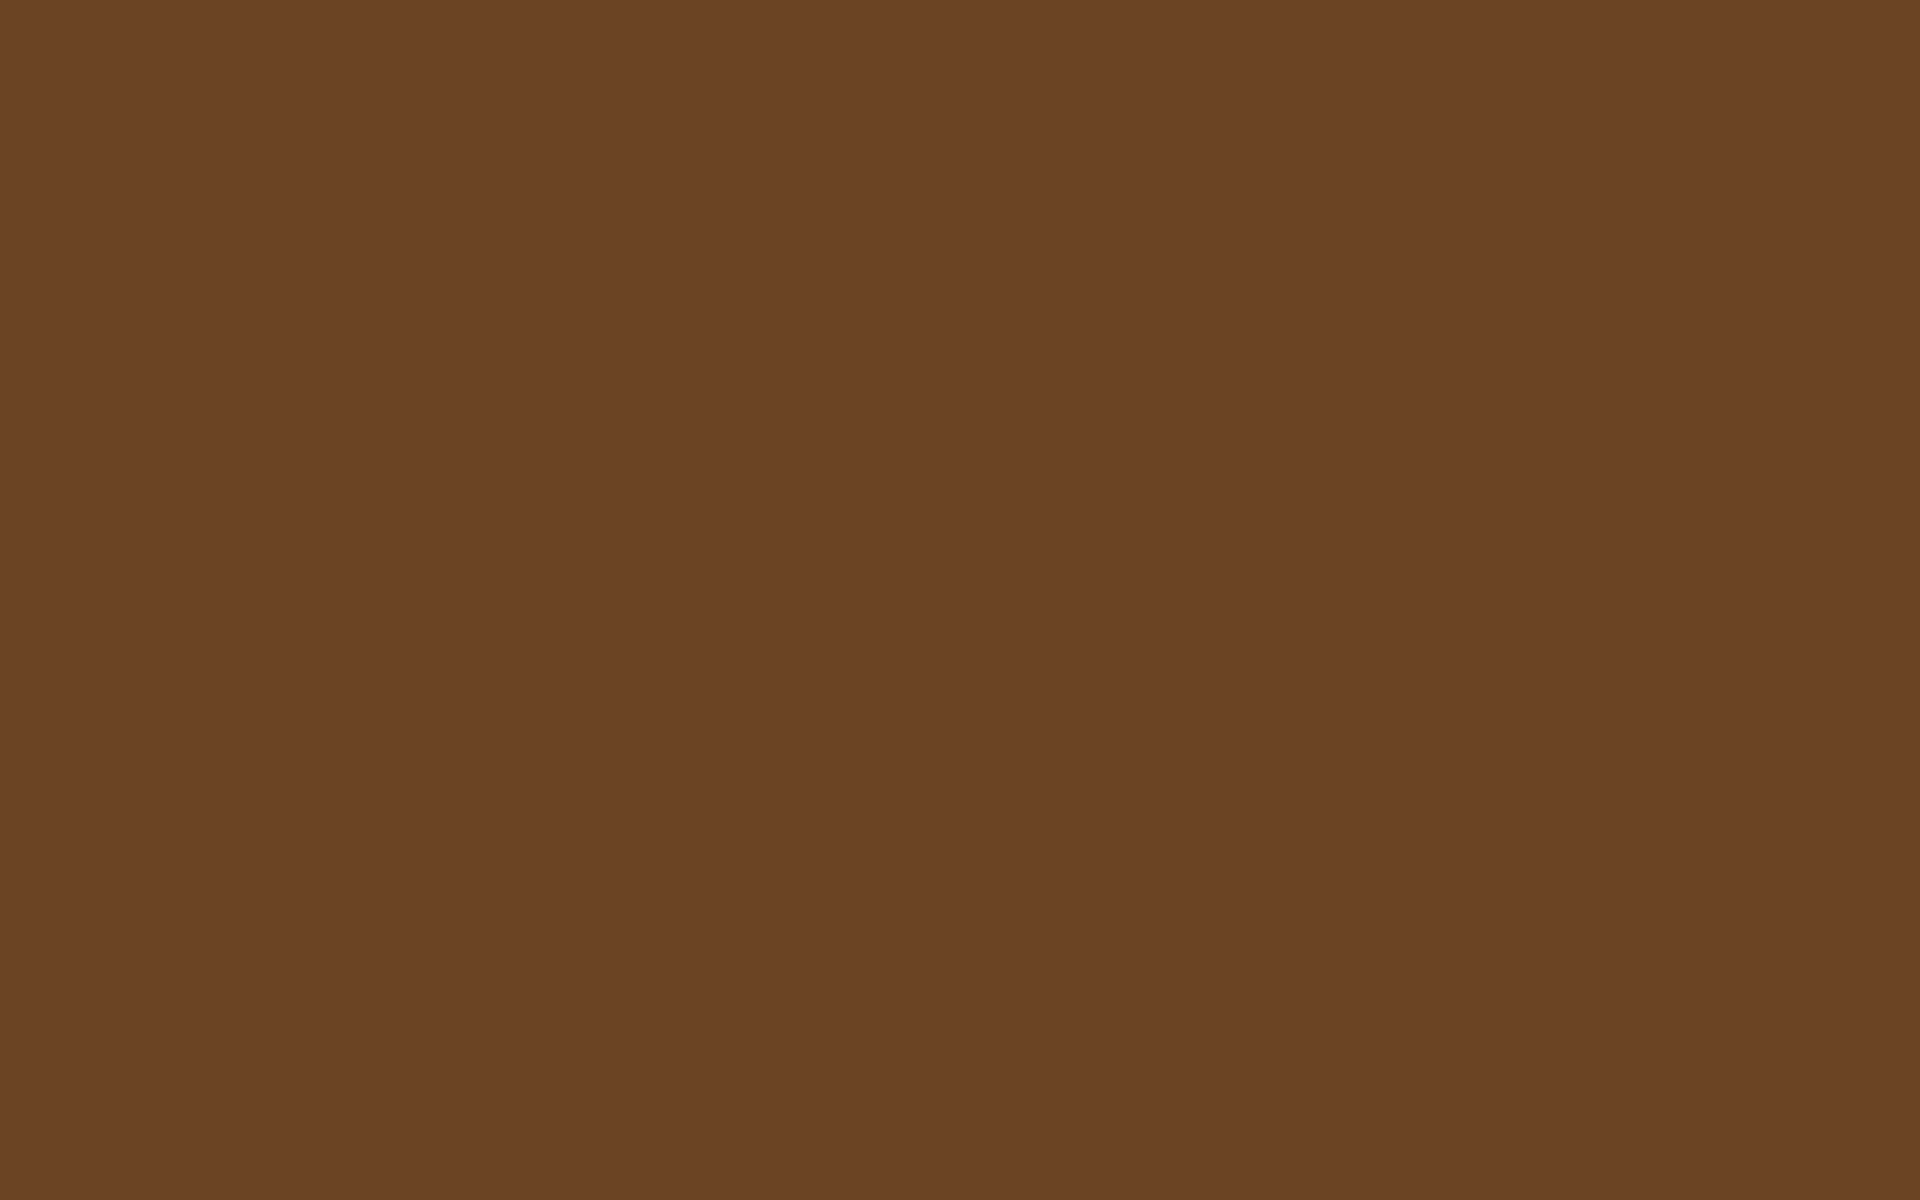 1920x1200 Brown-nose Solid Color Background